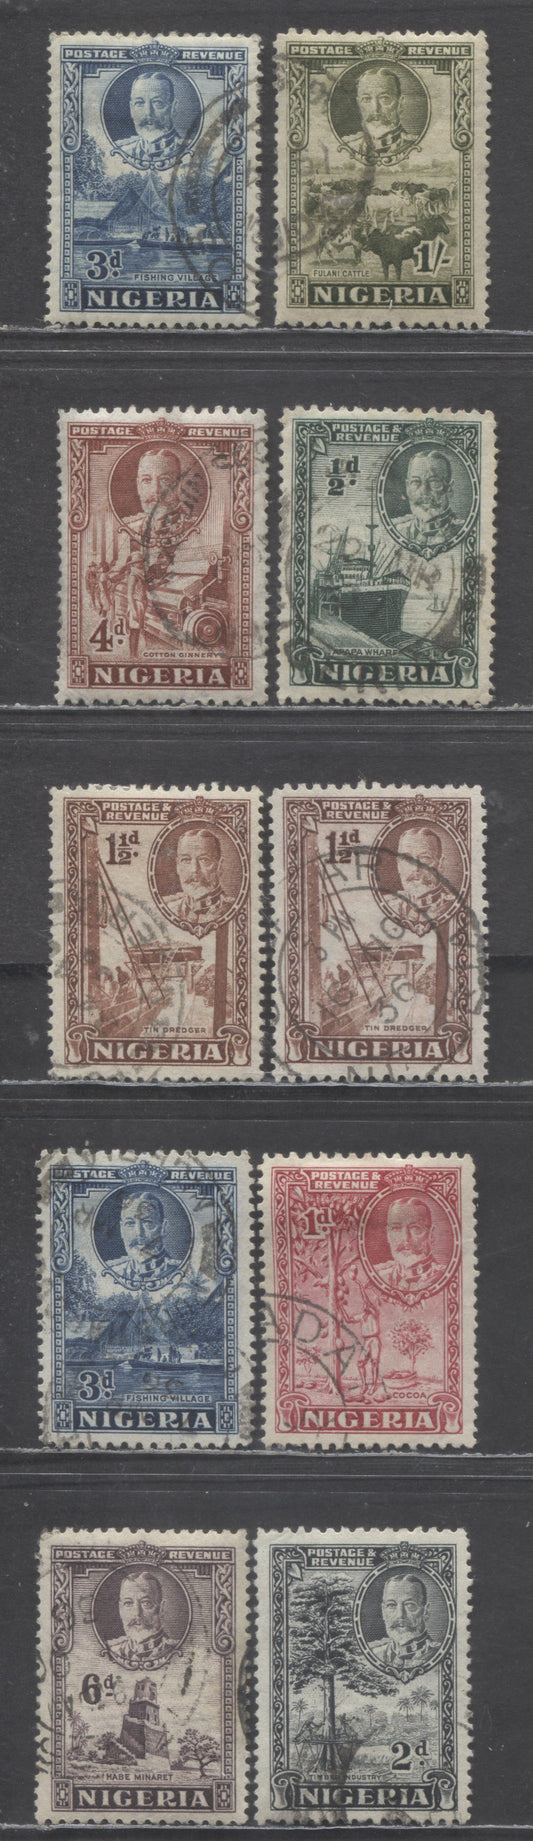 Nigeria SC#38-45 1936 Pictorial Issue, Includes Both 11.5x13 & 12.5x13.5, 10 Very Fine Used Singles, Click on Listing to See ALL Pictures, 2022 Scott Classic Cat. $40.1